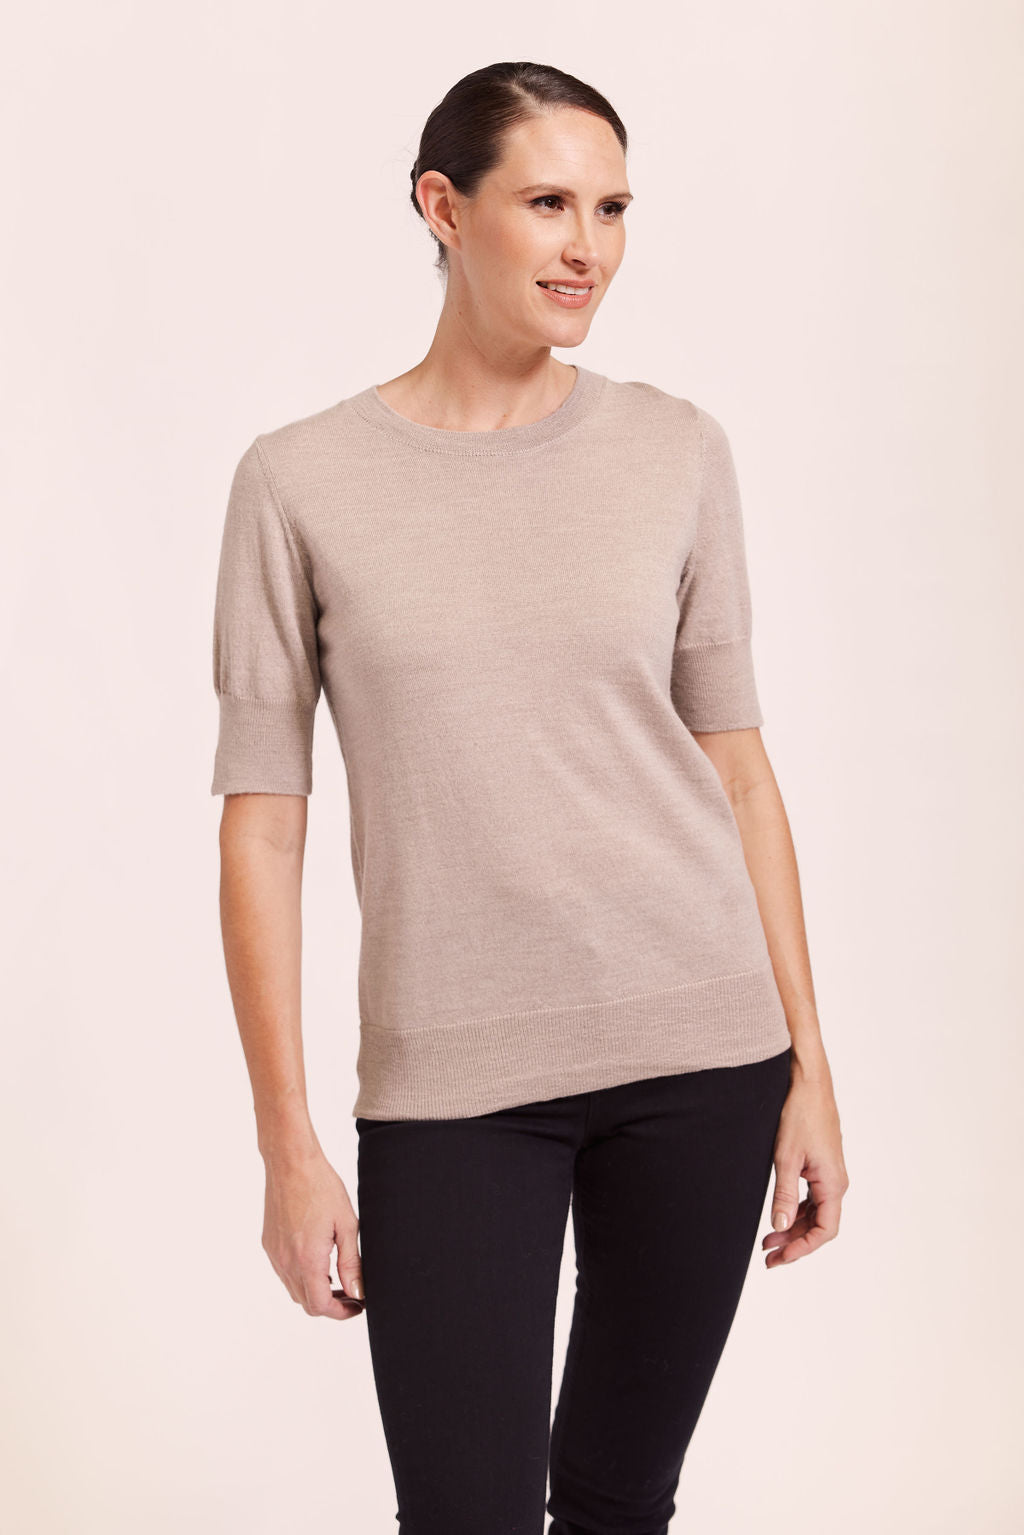 See Saw Short Sleeve Knit Top - Wheat